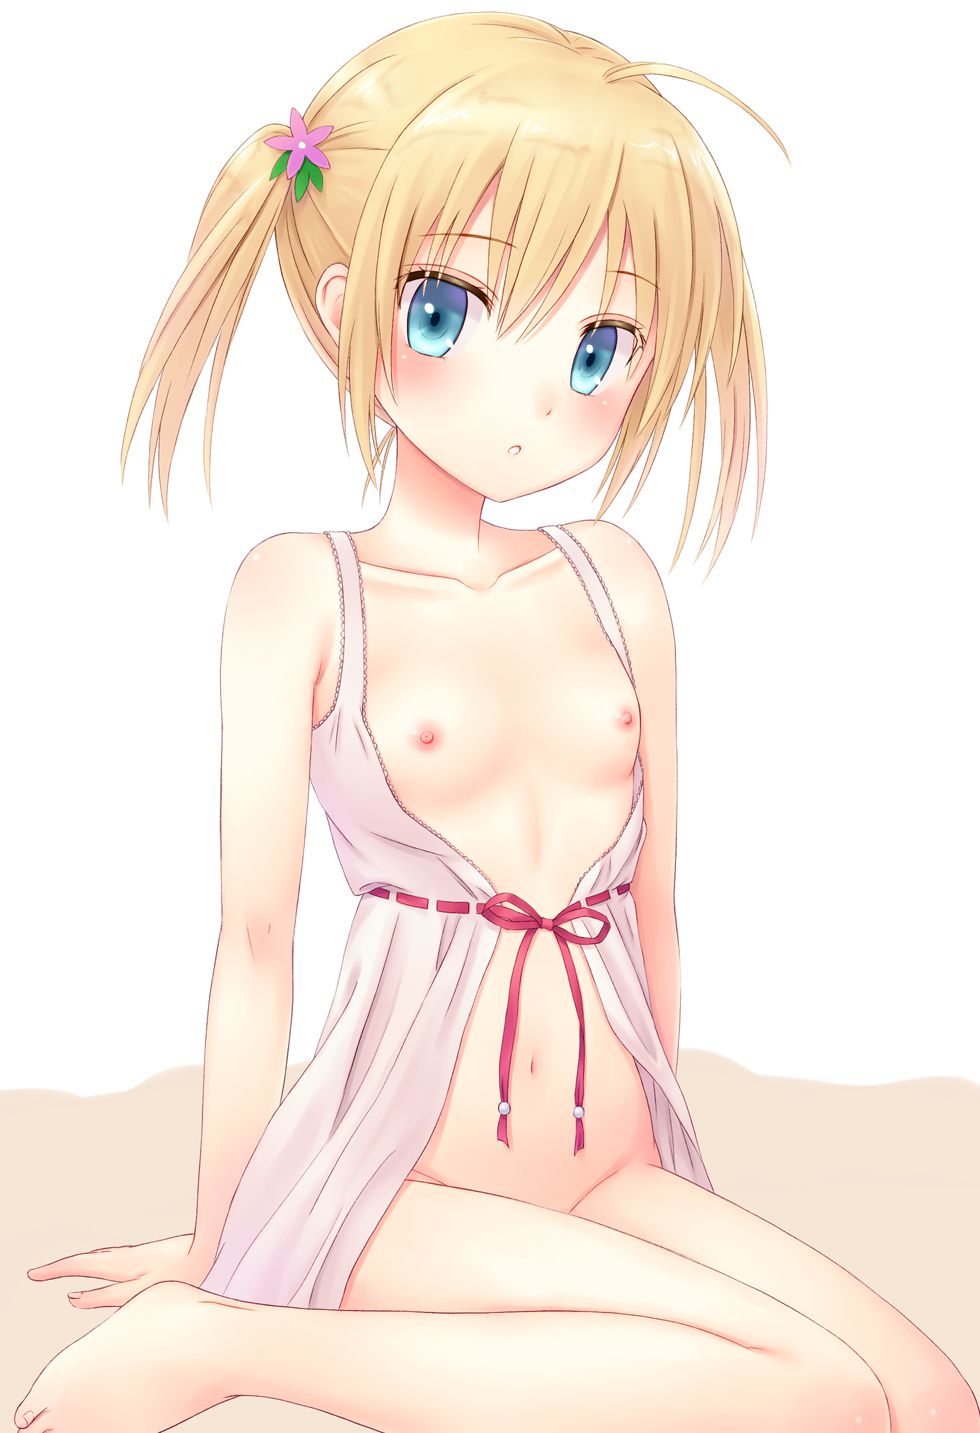 【Erotic Anime Summary】 Girls whose are small but exude eroticism 【Secondary erotica】 3